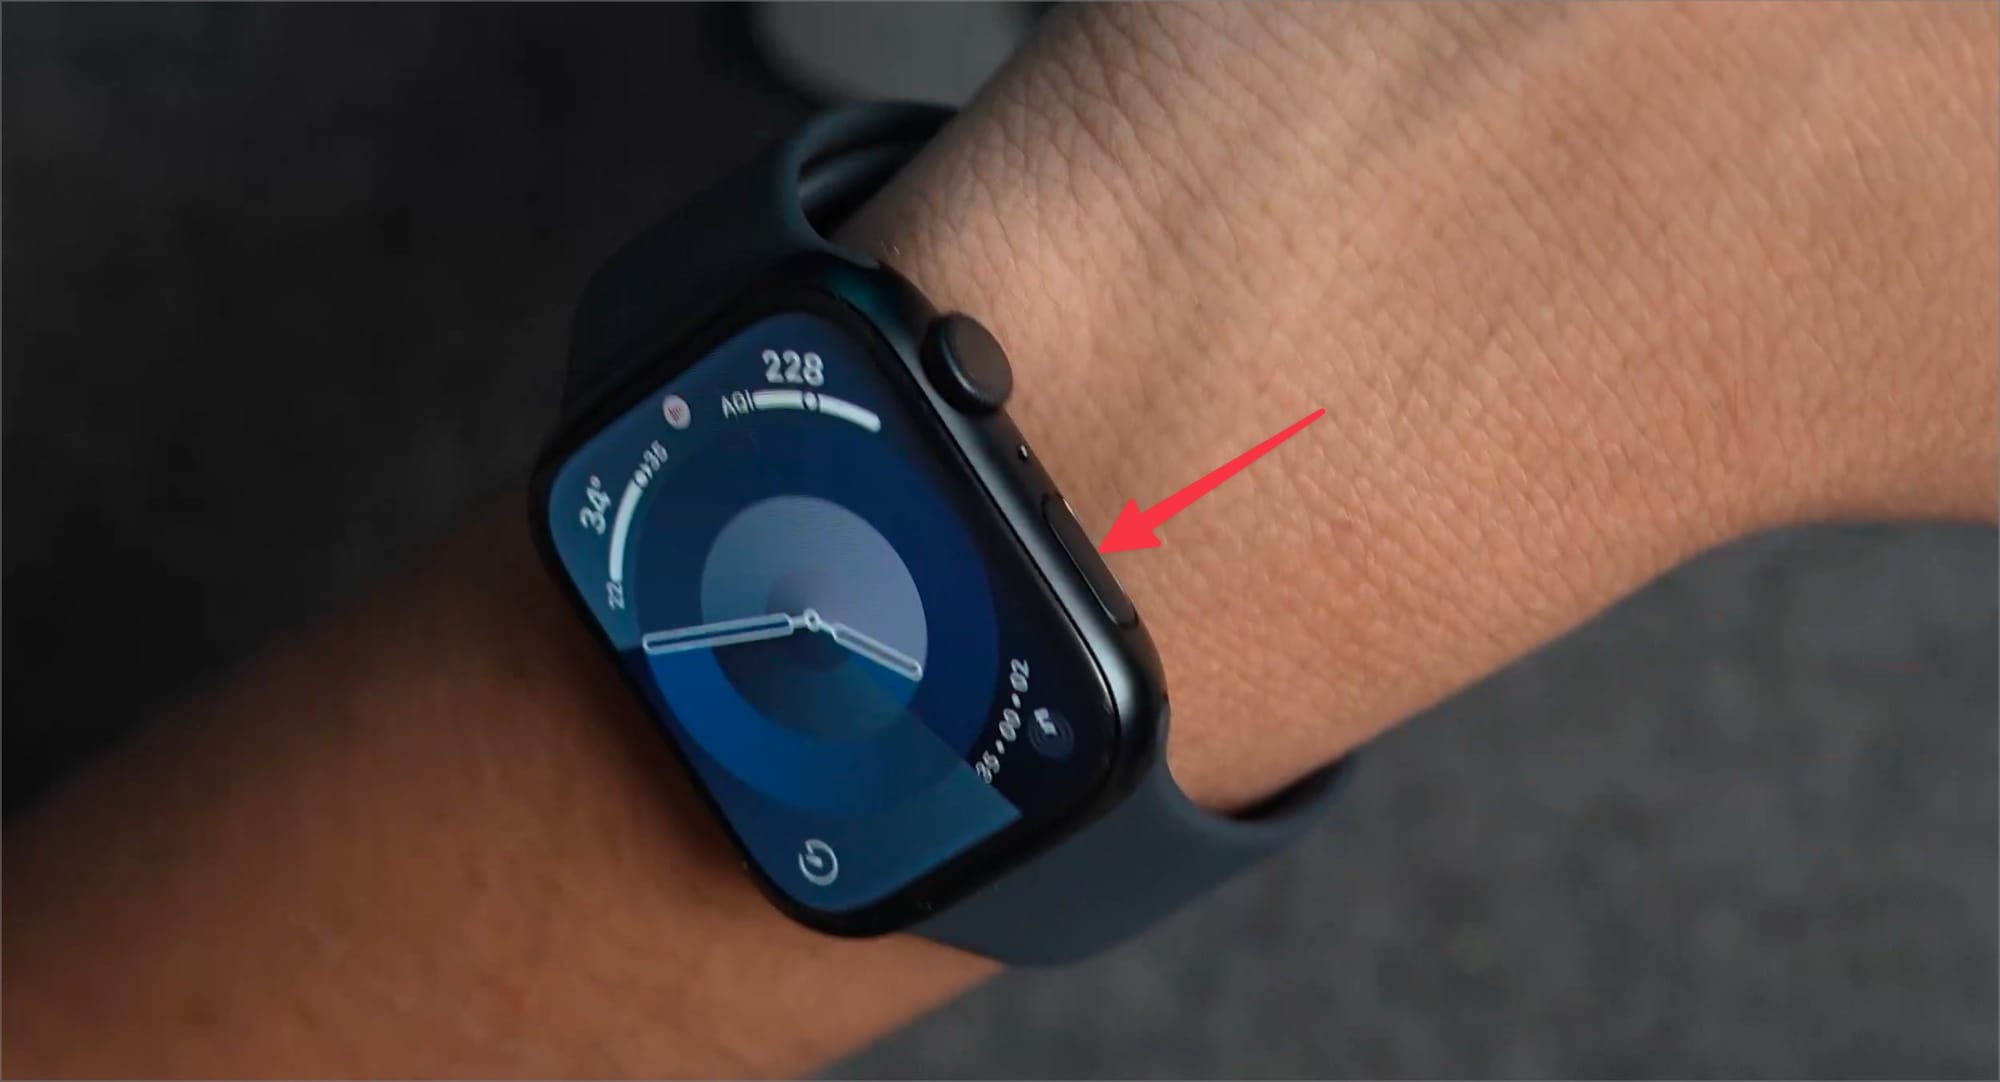 How to Ping iPhone from Apple Watch